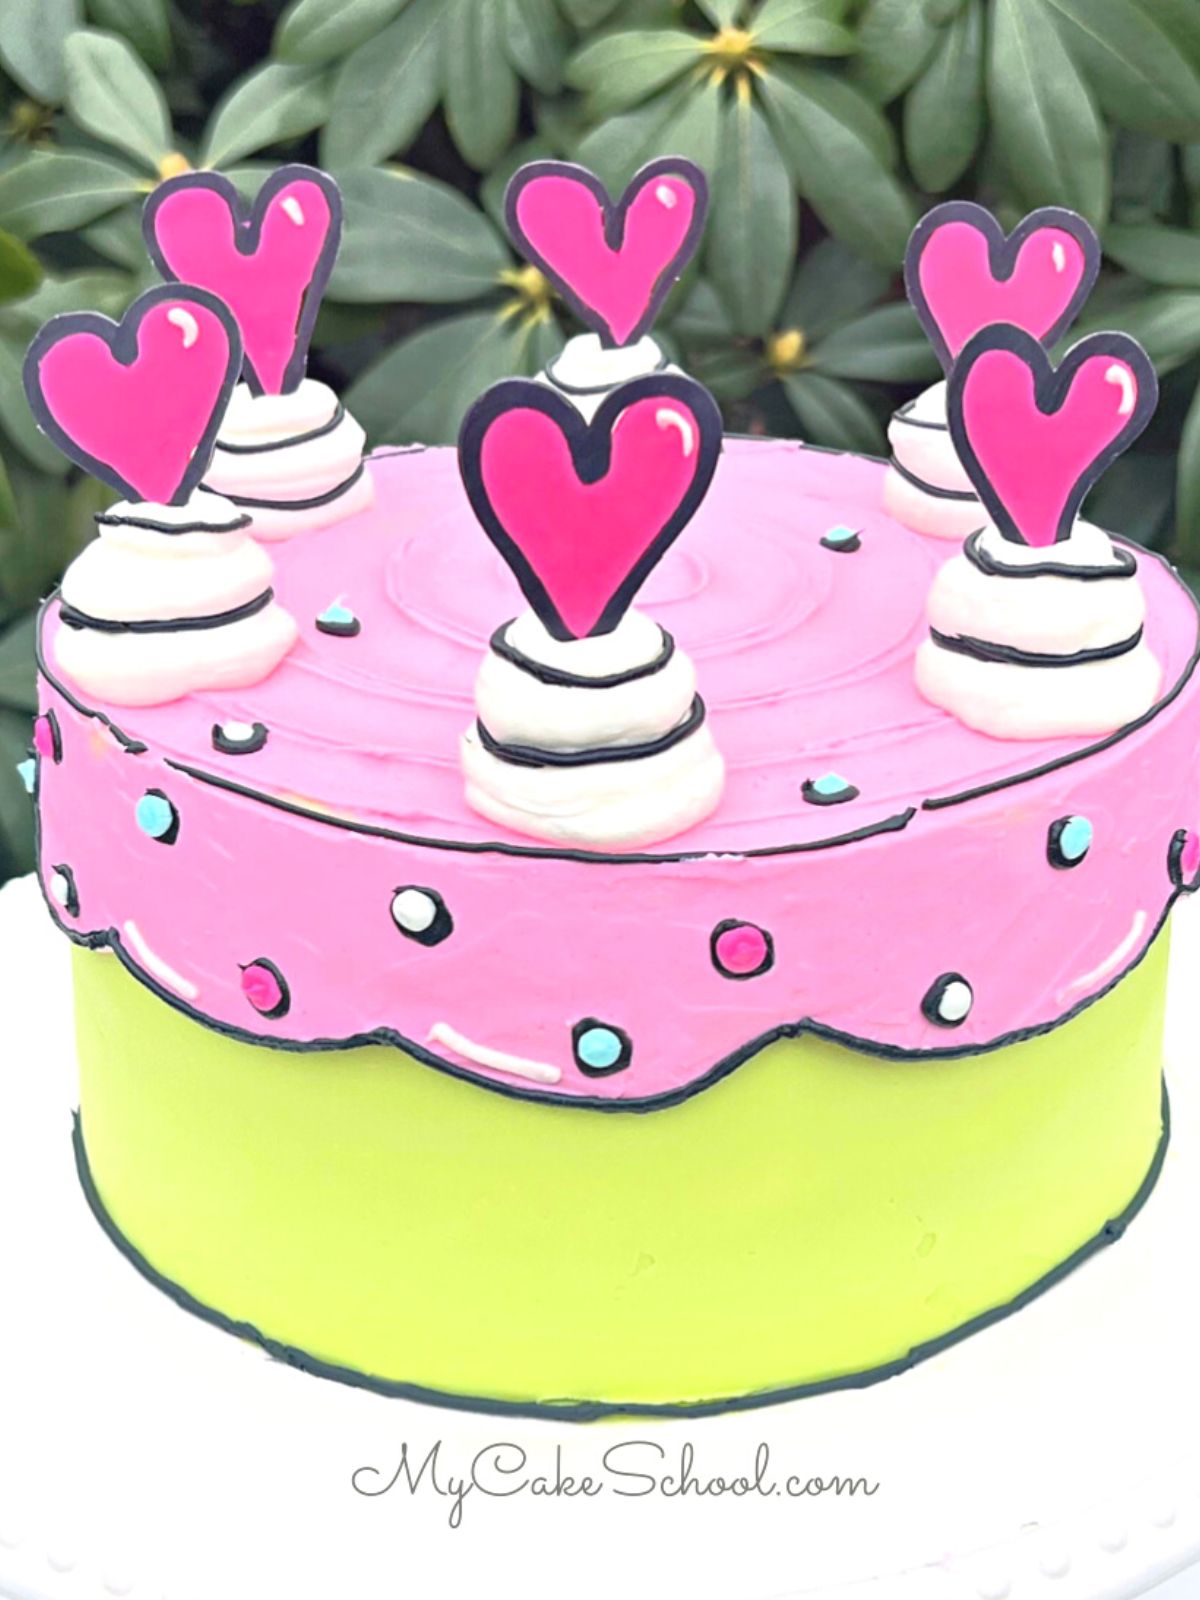 Cartoon Cake with pink and green frosting, topped with pink hearts.